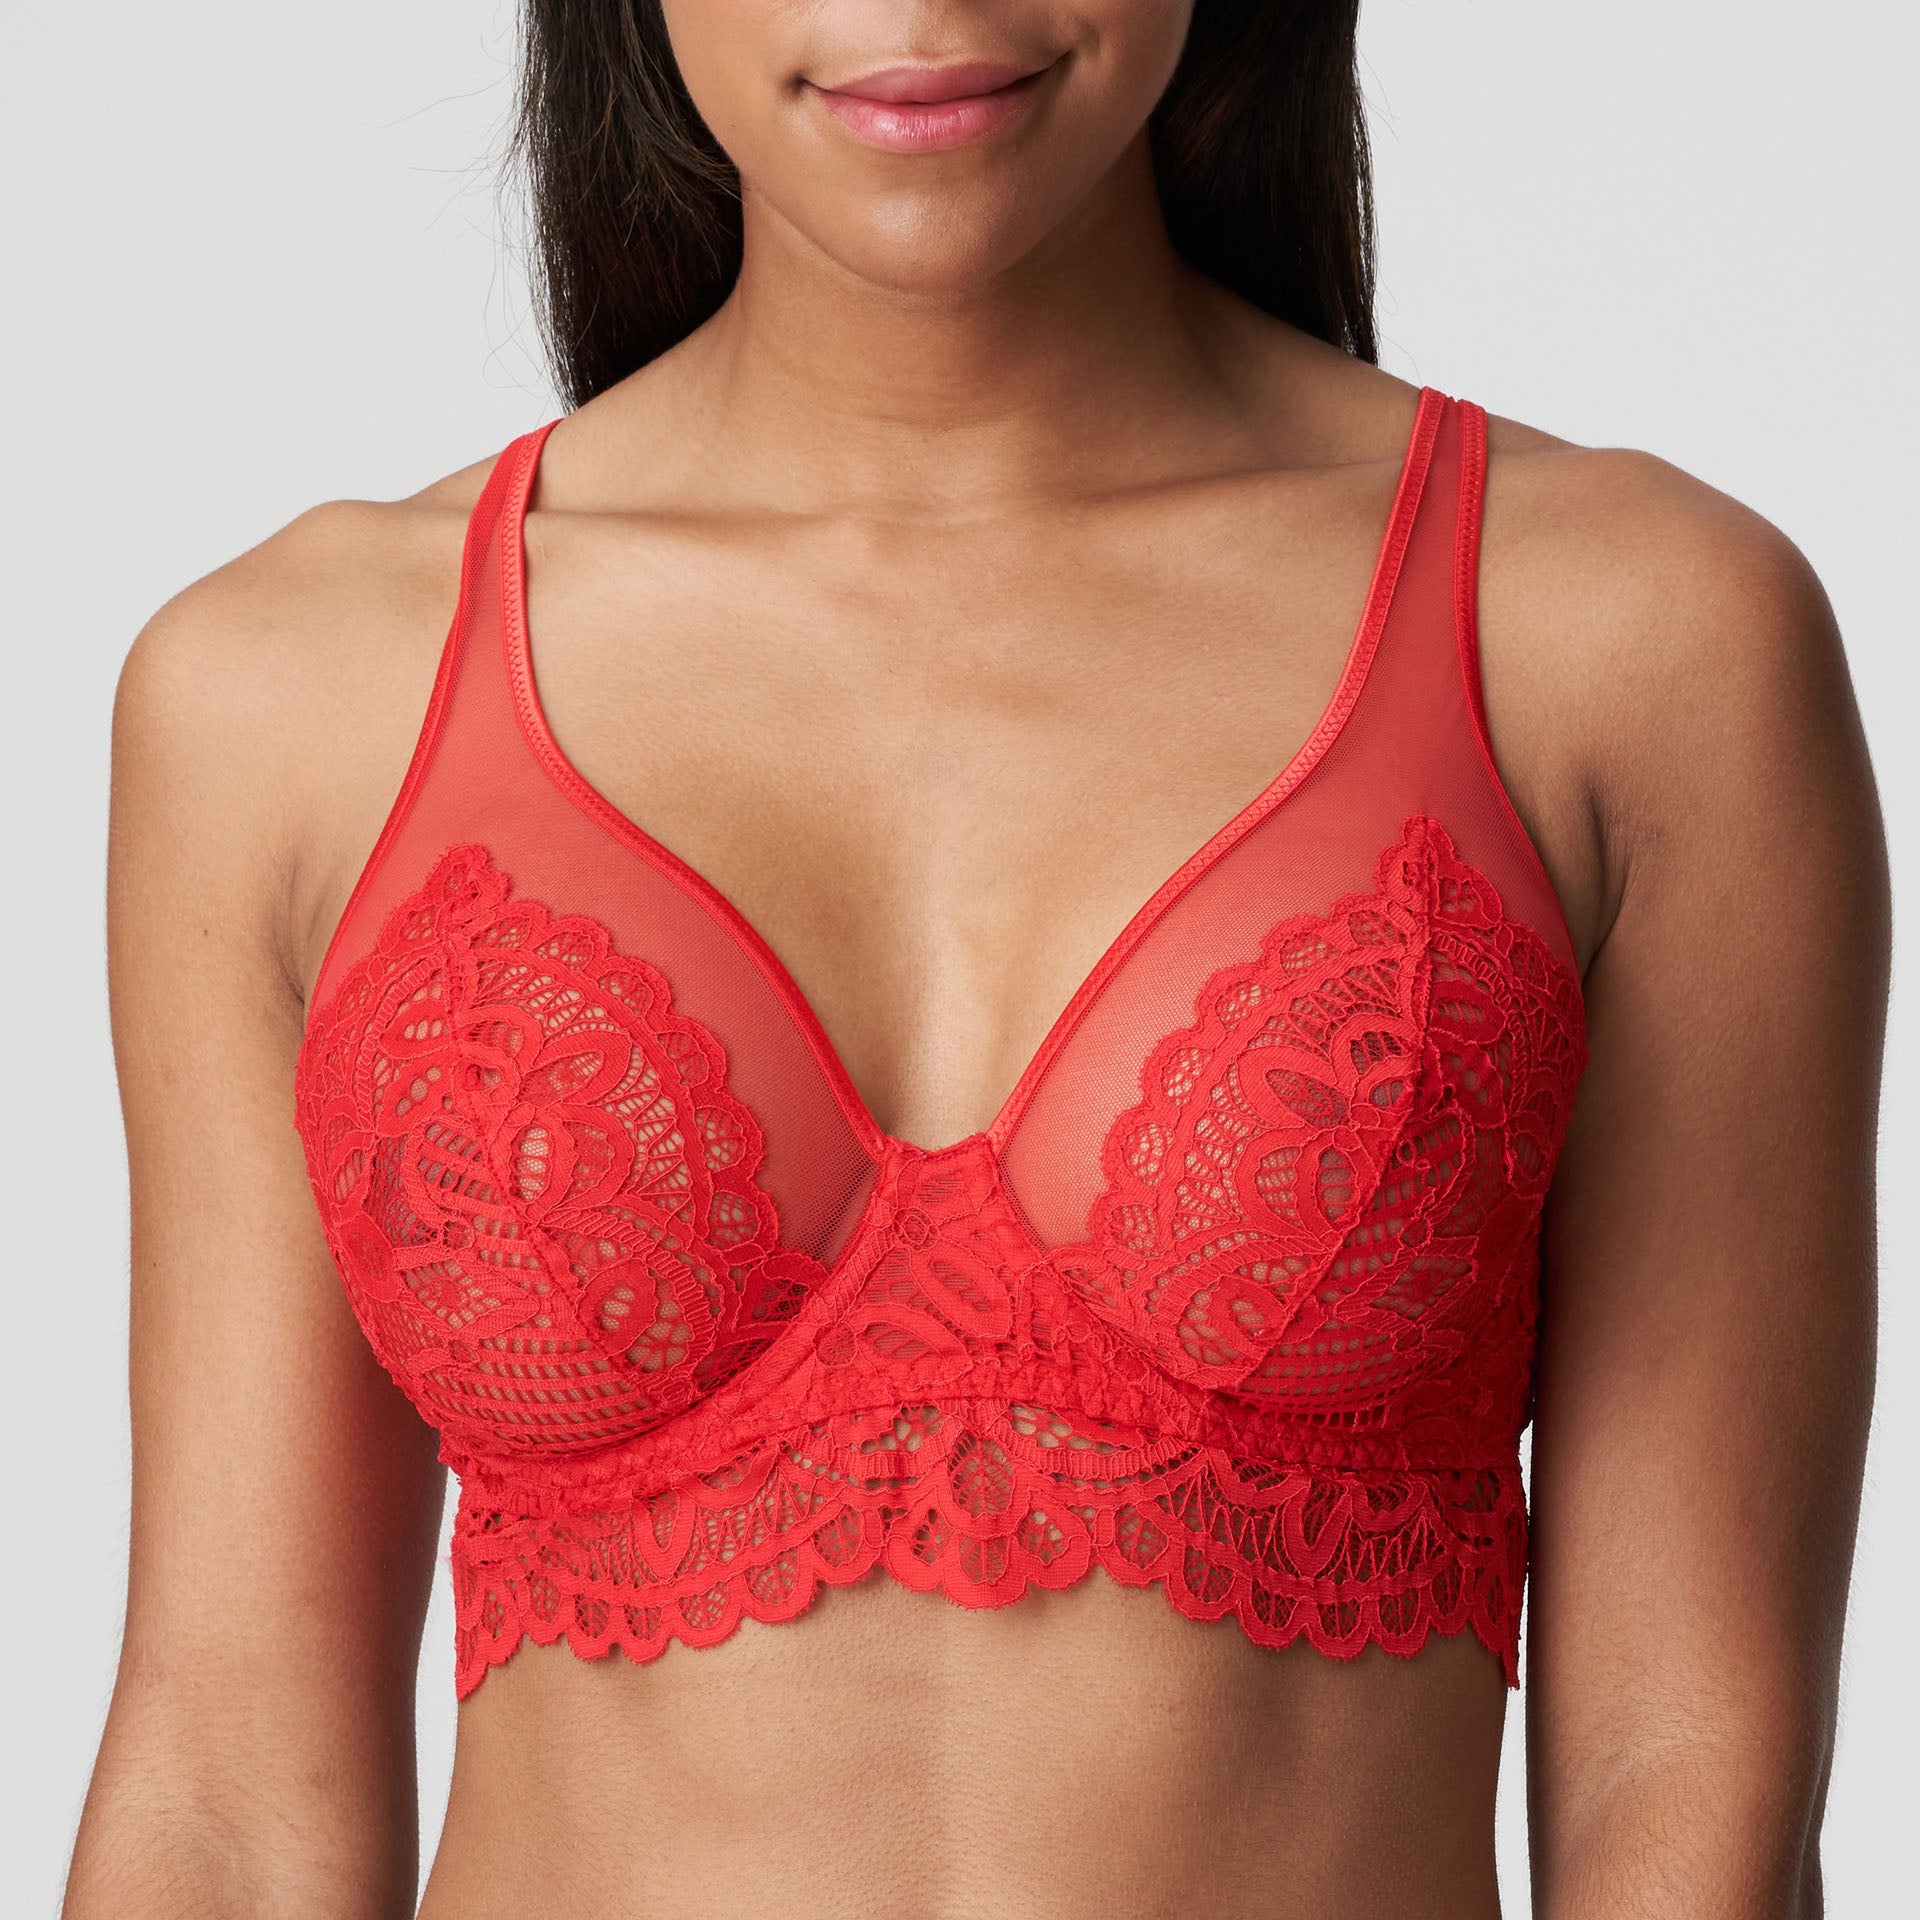 BRAS ON SALE 34E, Bras for Large Breasts